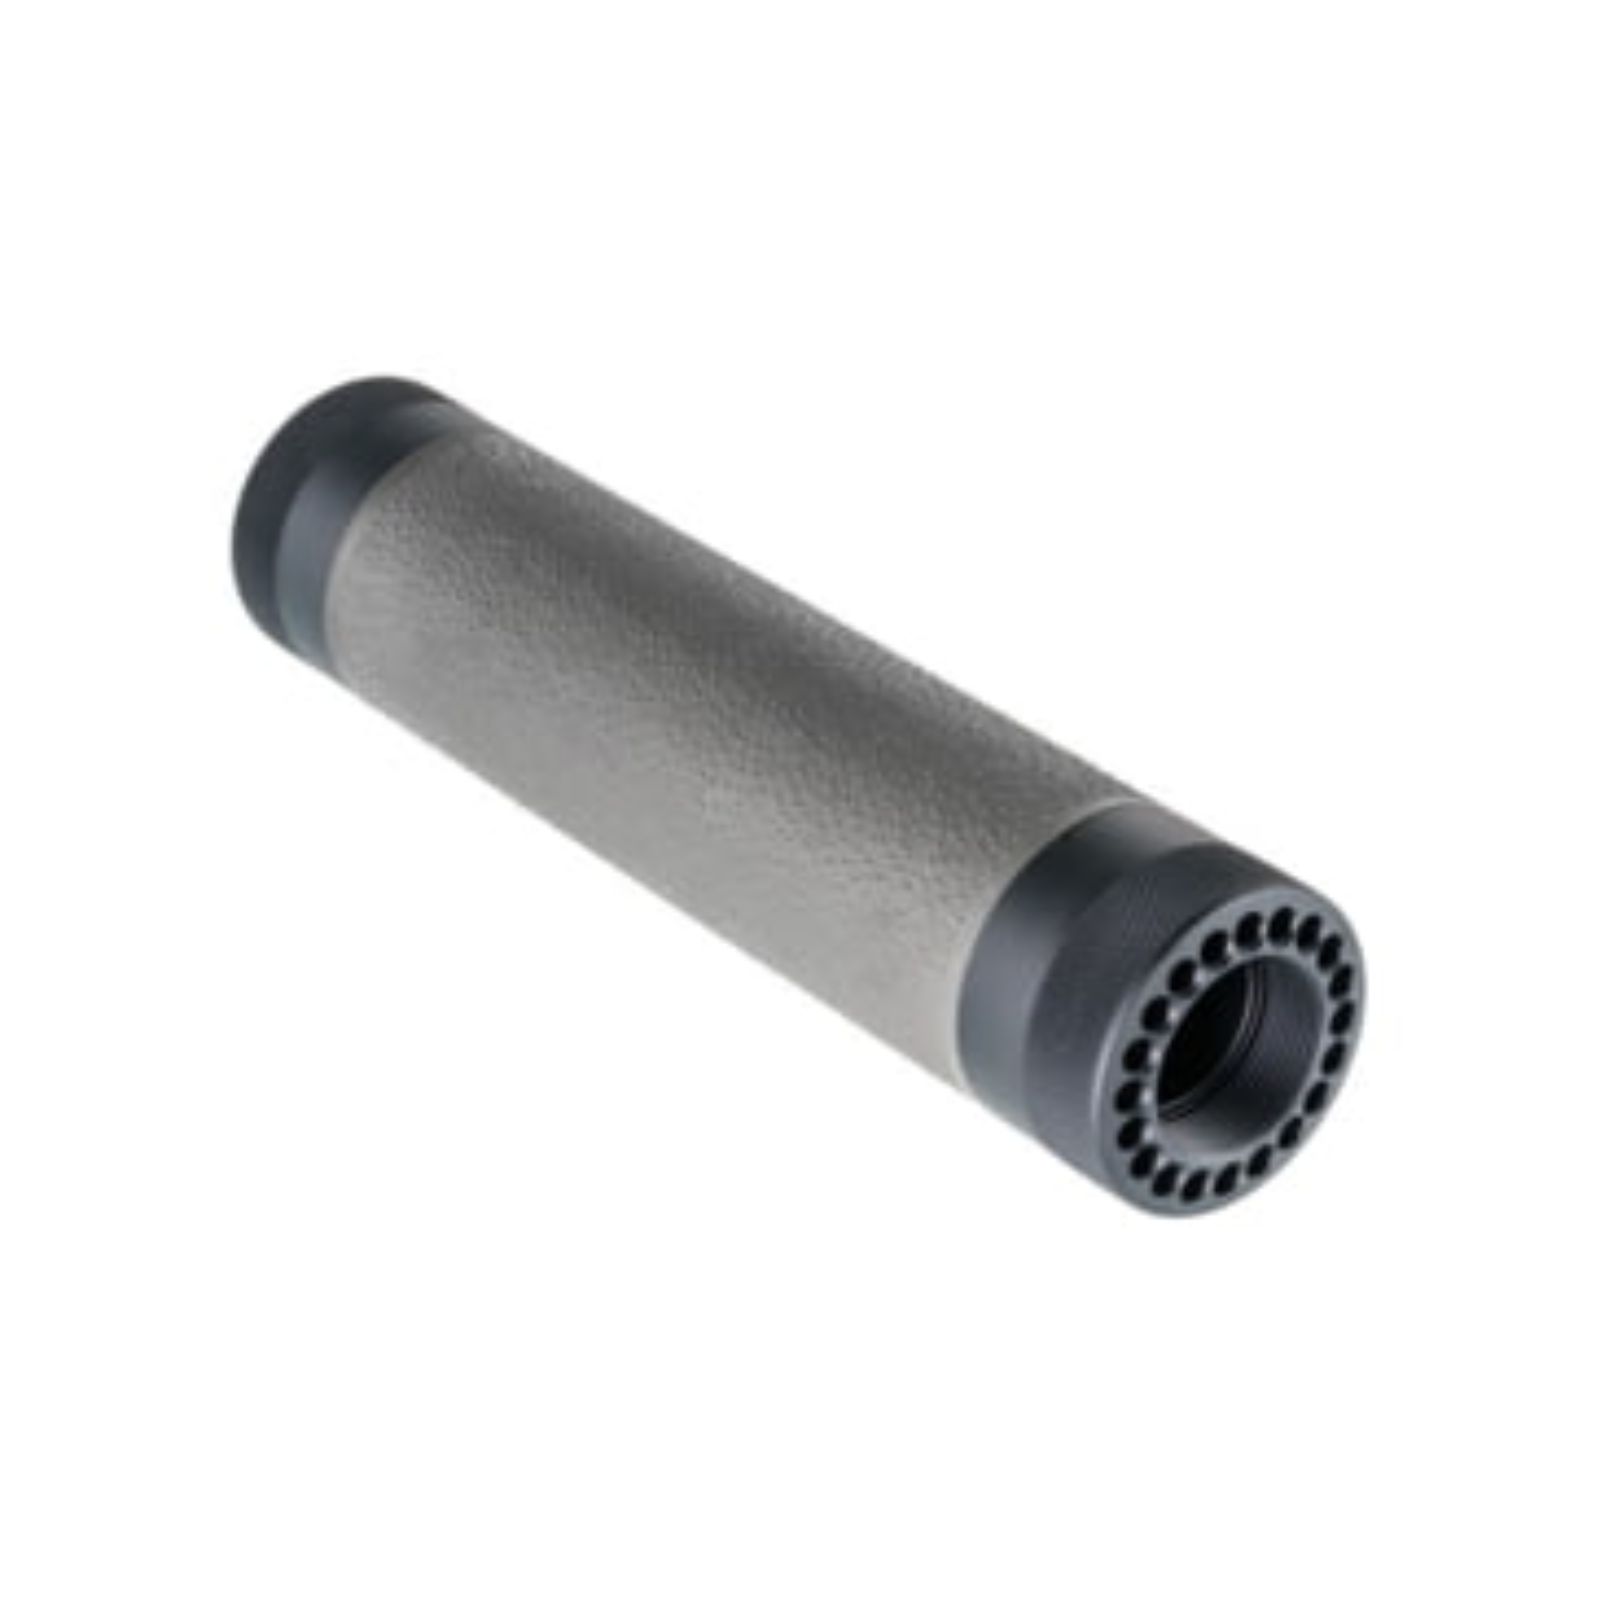 Hogue AR15 M16 Free Float Forend with Grey Rubber Gripping